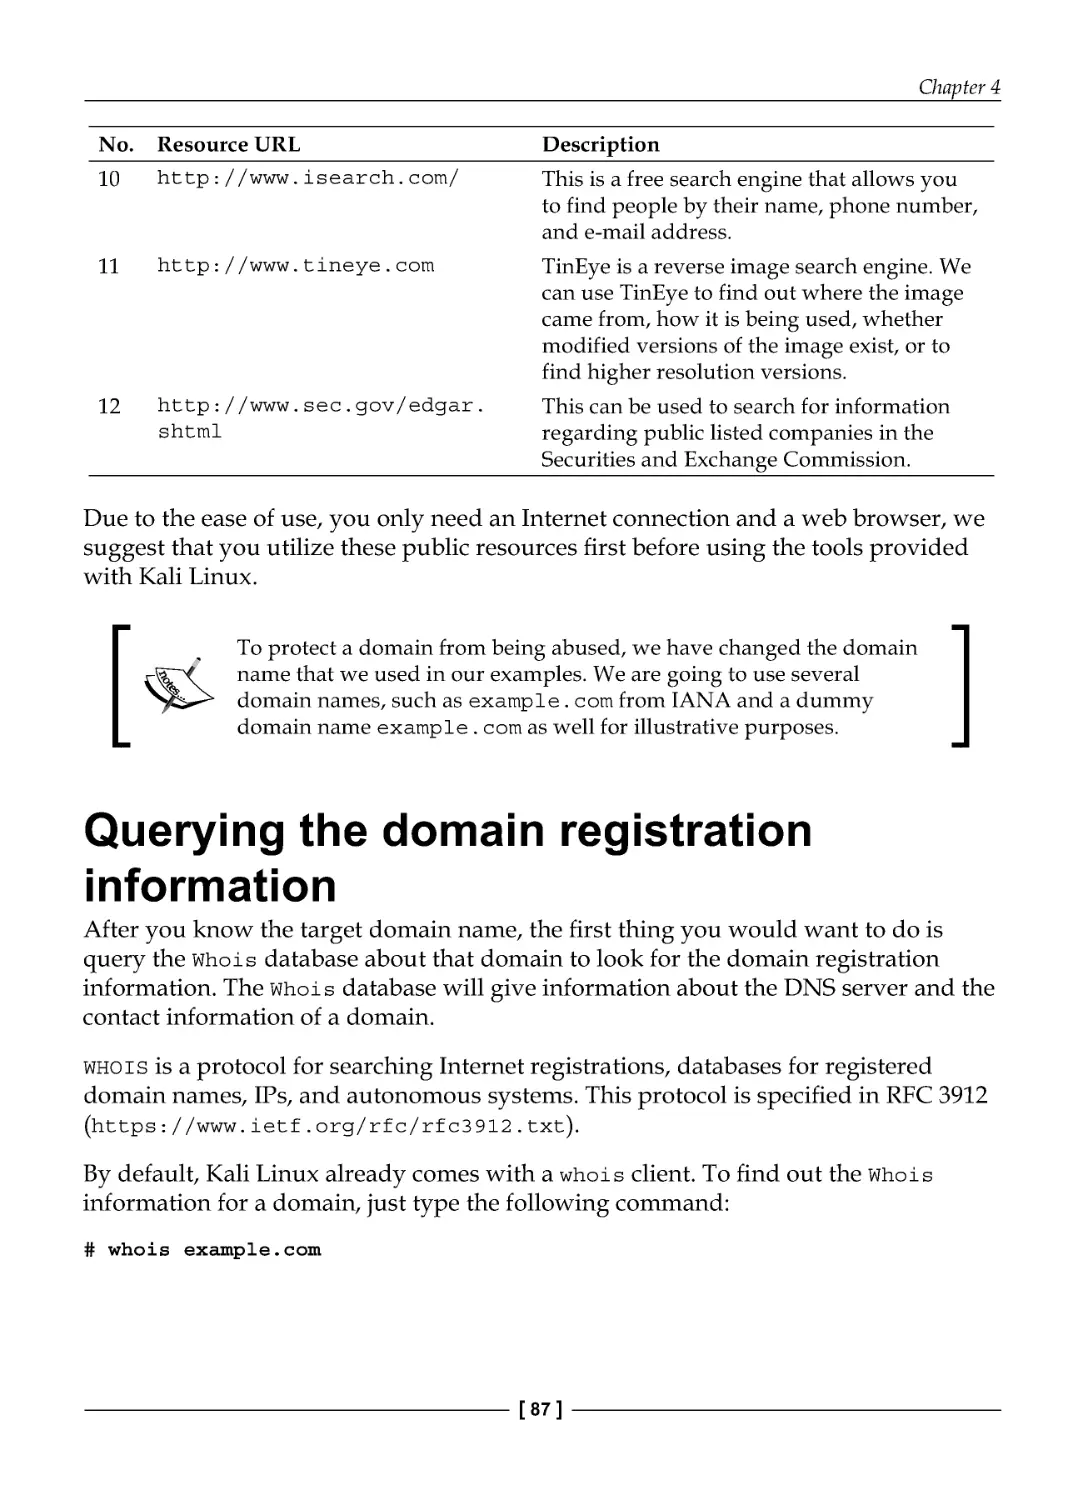 Querying the domain registration information